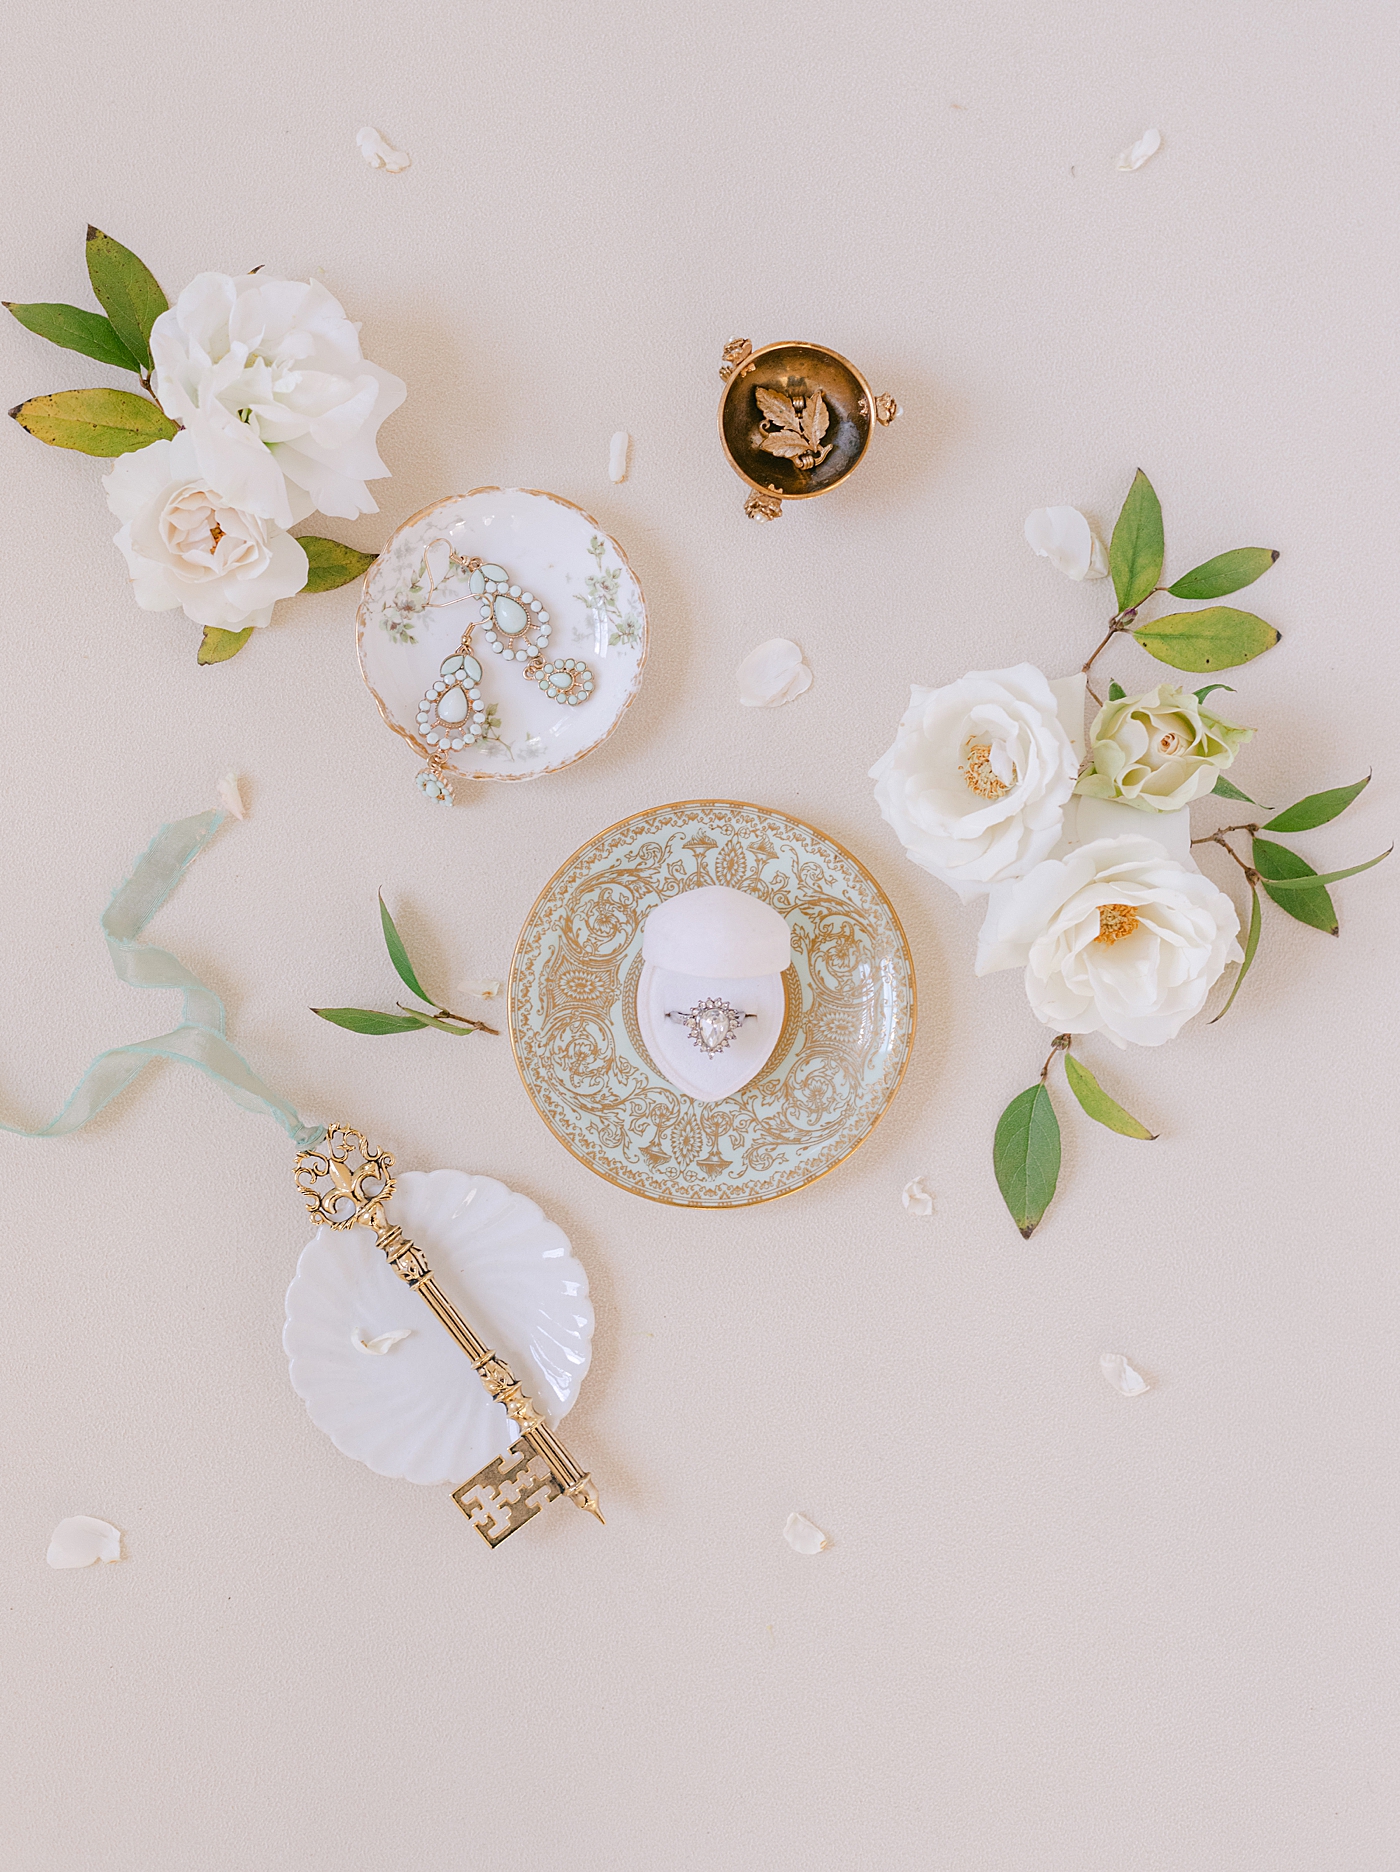 Bridal jewelry styled with boxes and flowers during Old World Romance Editorial | Photo by Hope Helmuth Photograpghy